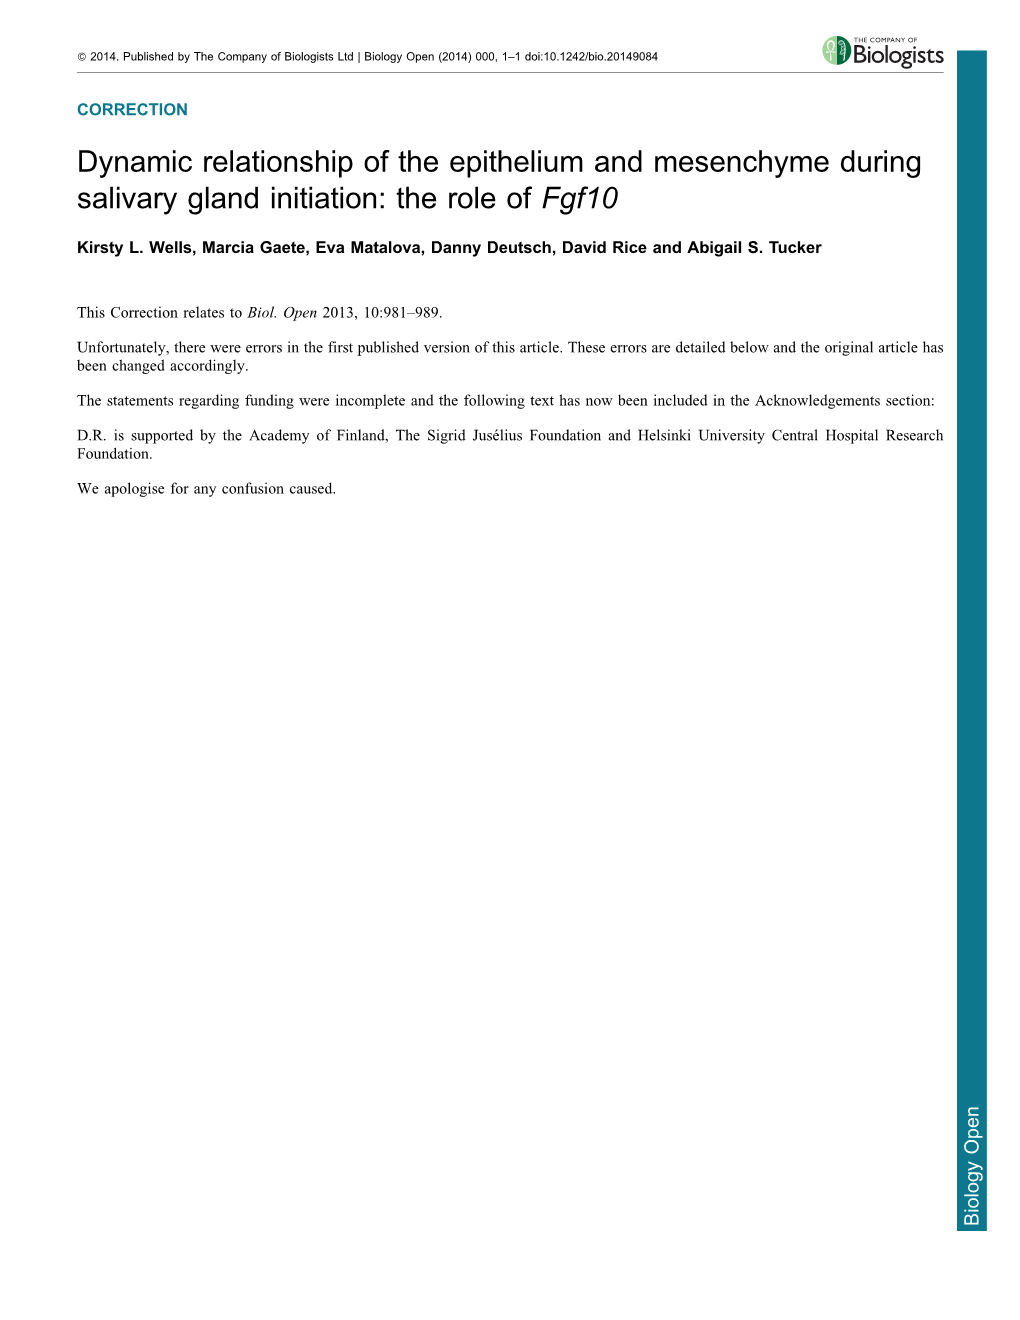 Dynamic Relationship of the Epithelium and Mesenchyme During Salivary Gland Initiation: the Role of Fgf10